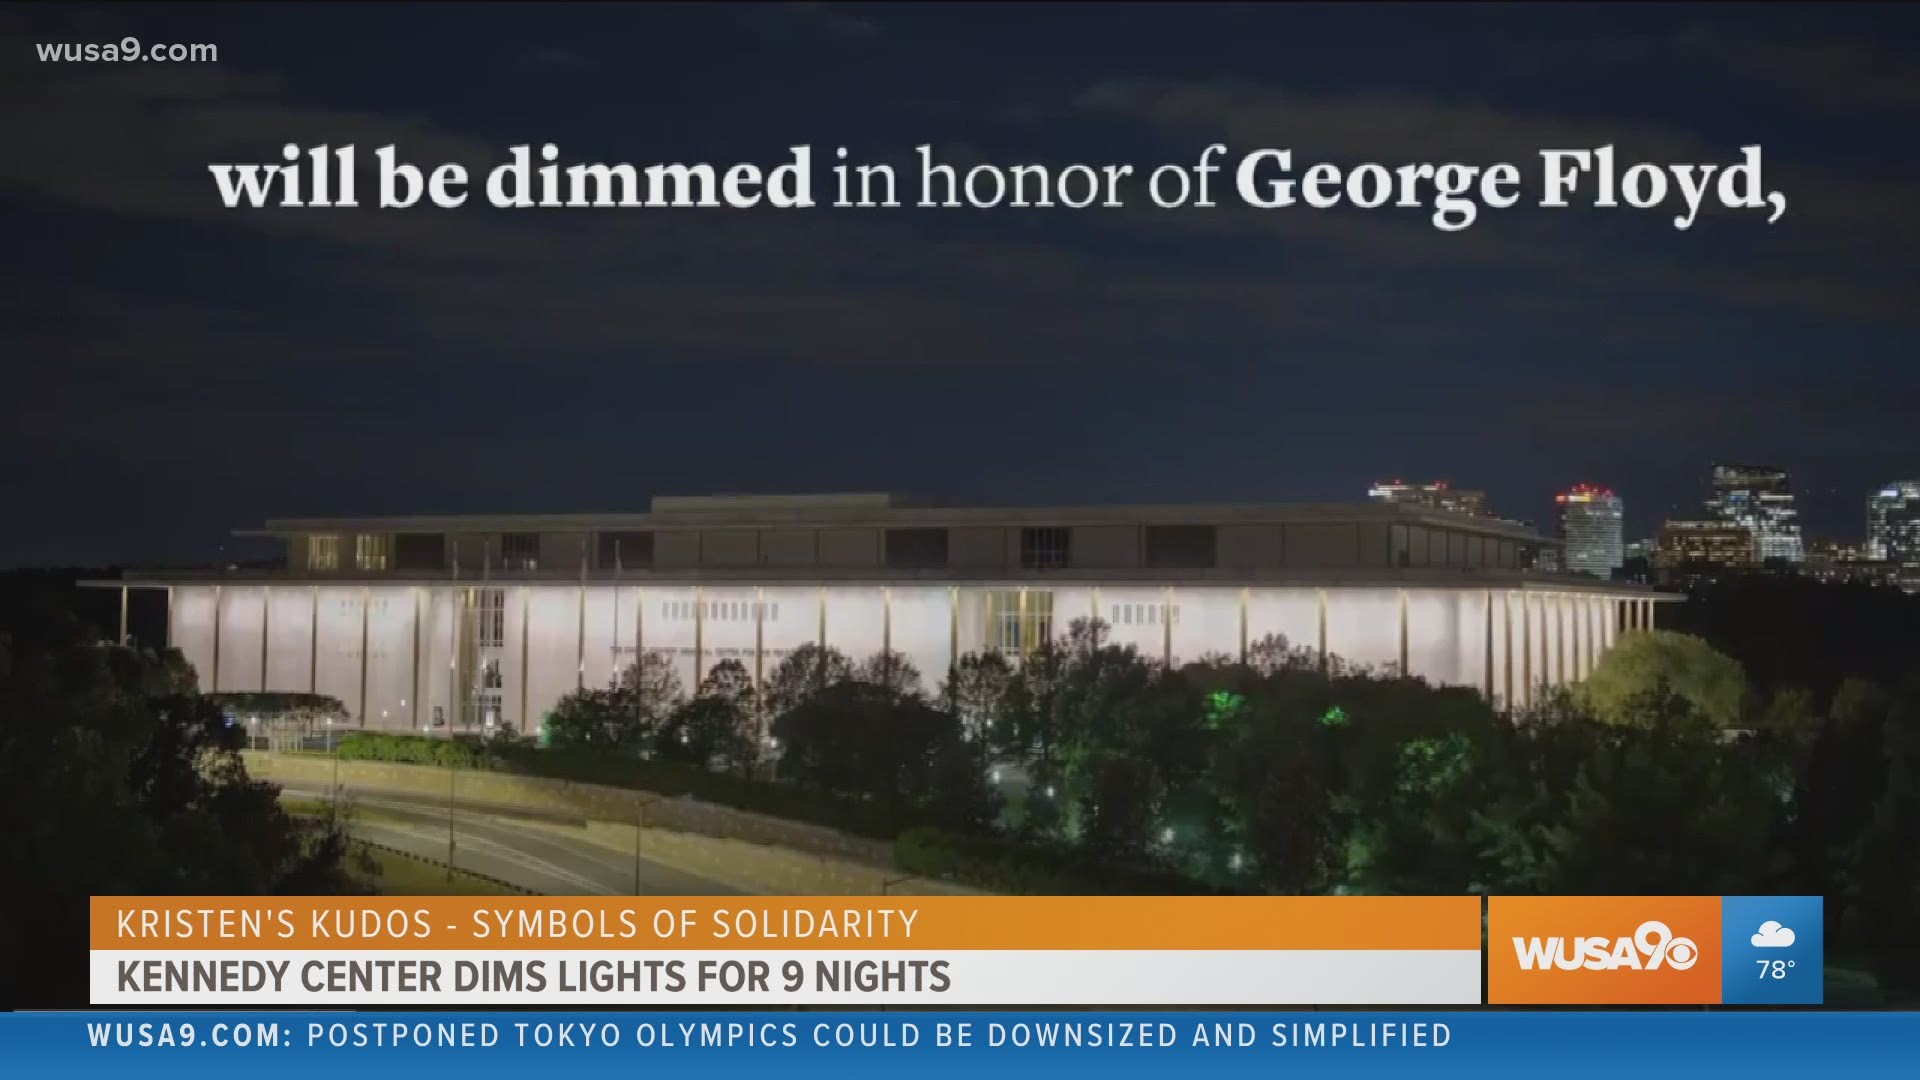 Kristen's Kudos: The John F. Kennedy Center for the Performing Arts is dimming the lights to honor George Floyd.